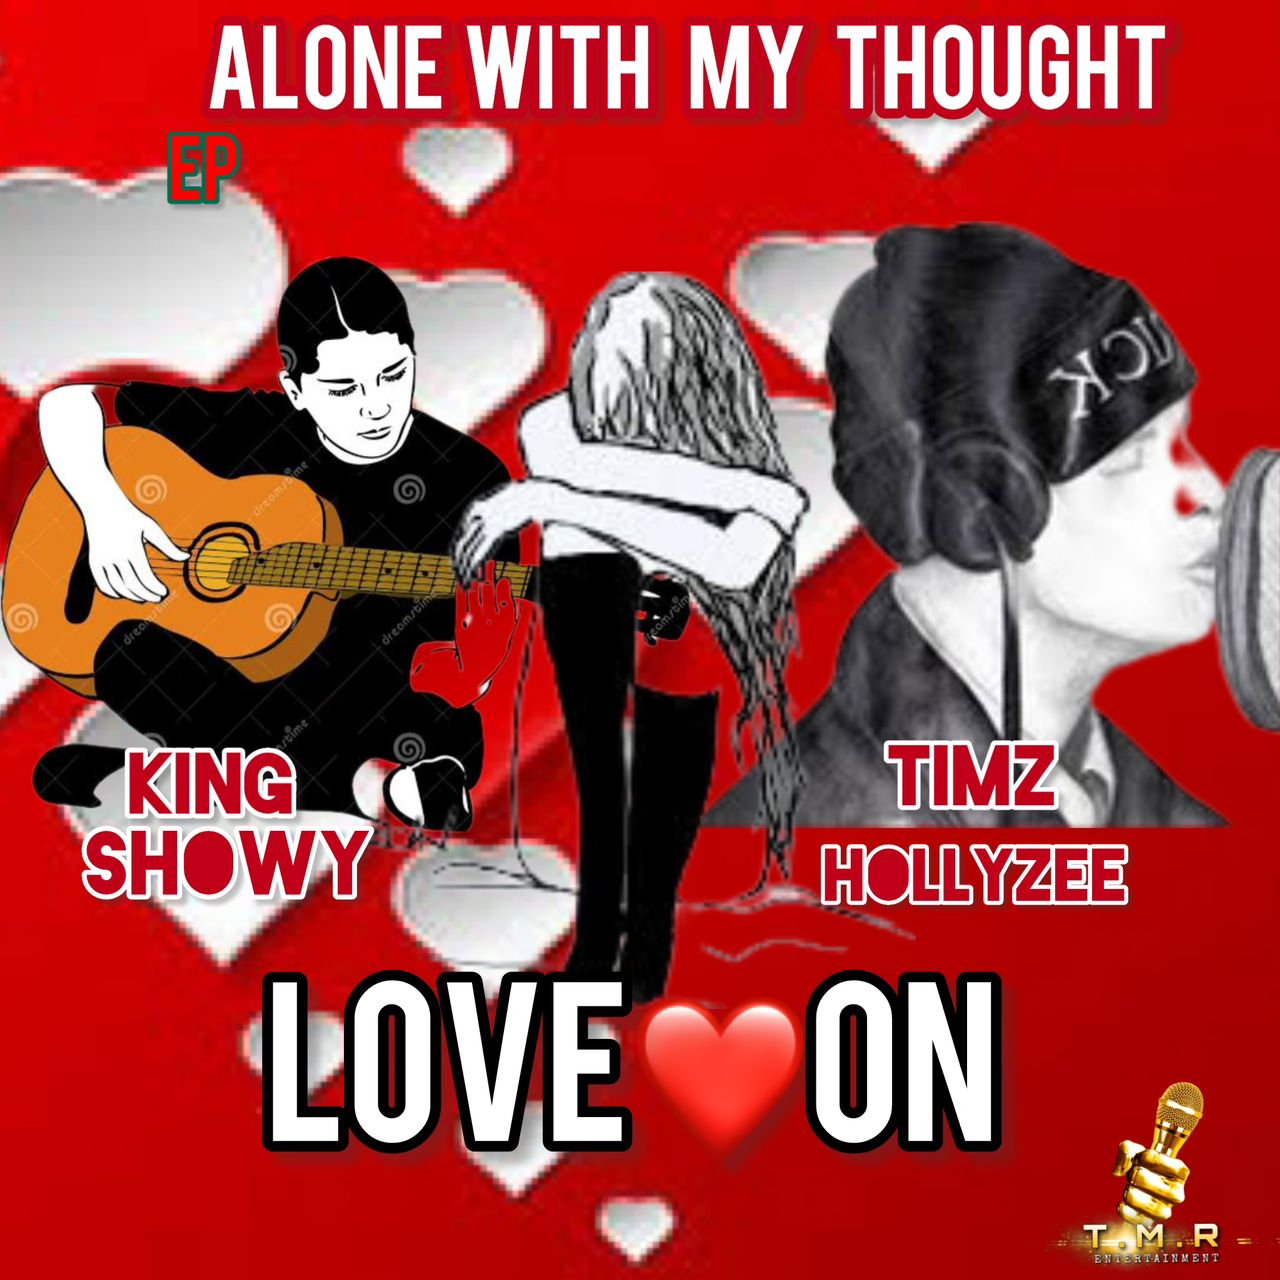 Timz Hollyzee King Showy Alone With My Thought